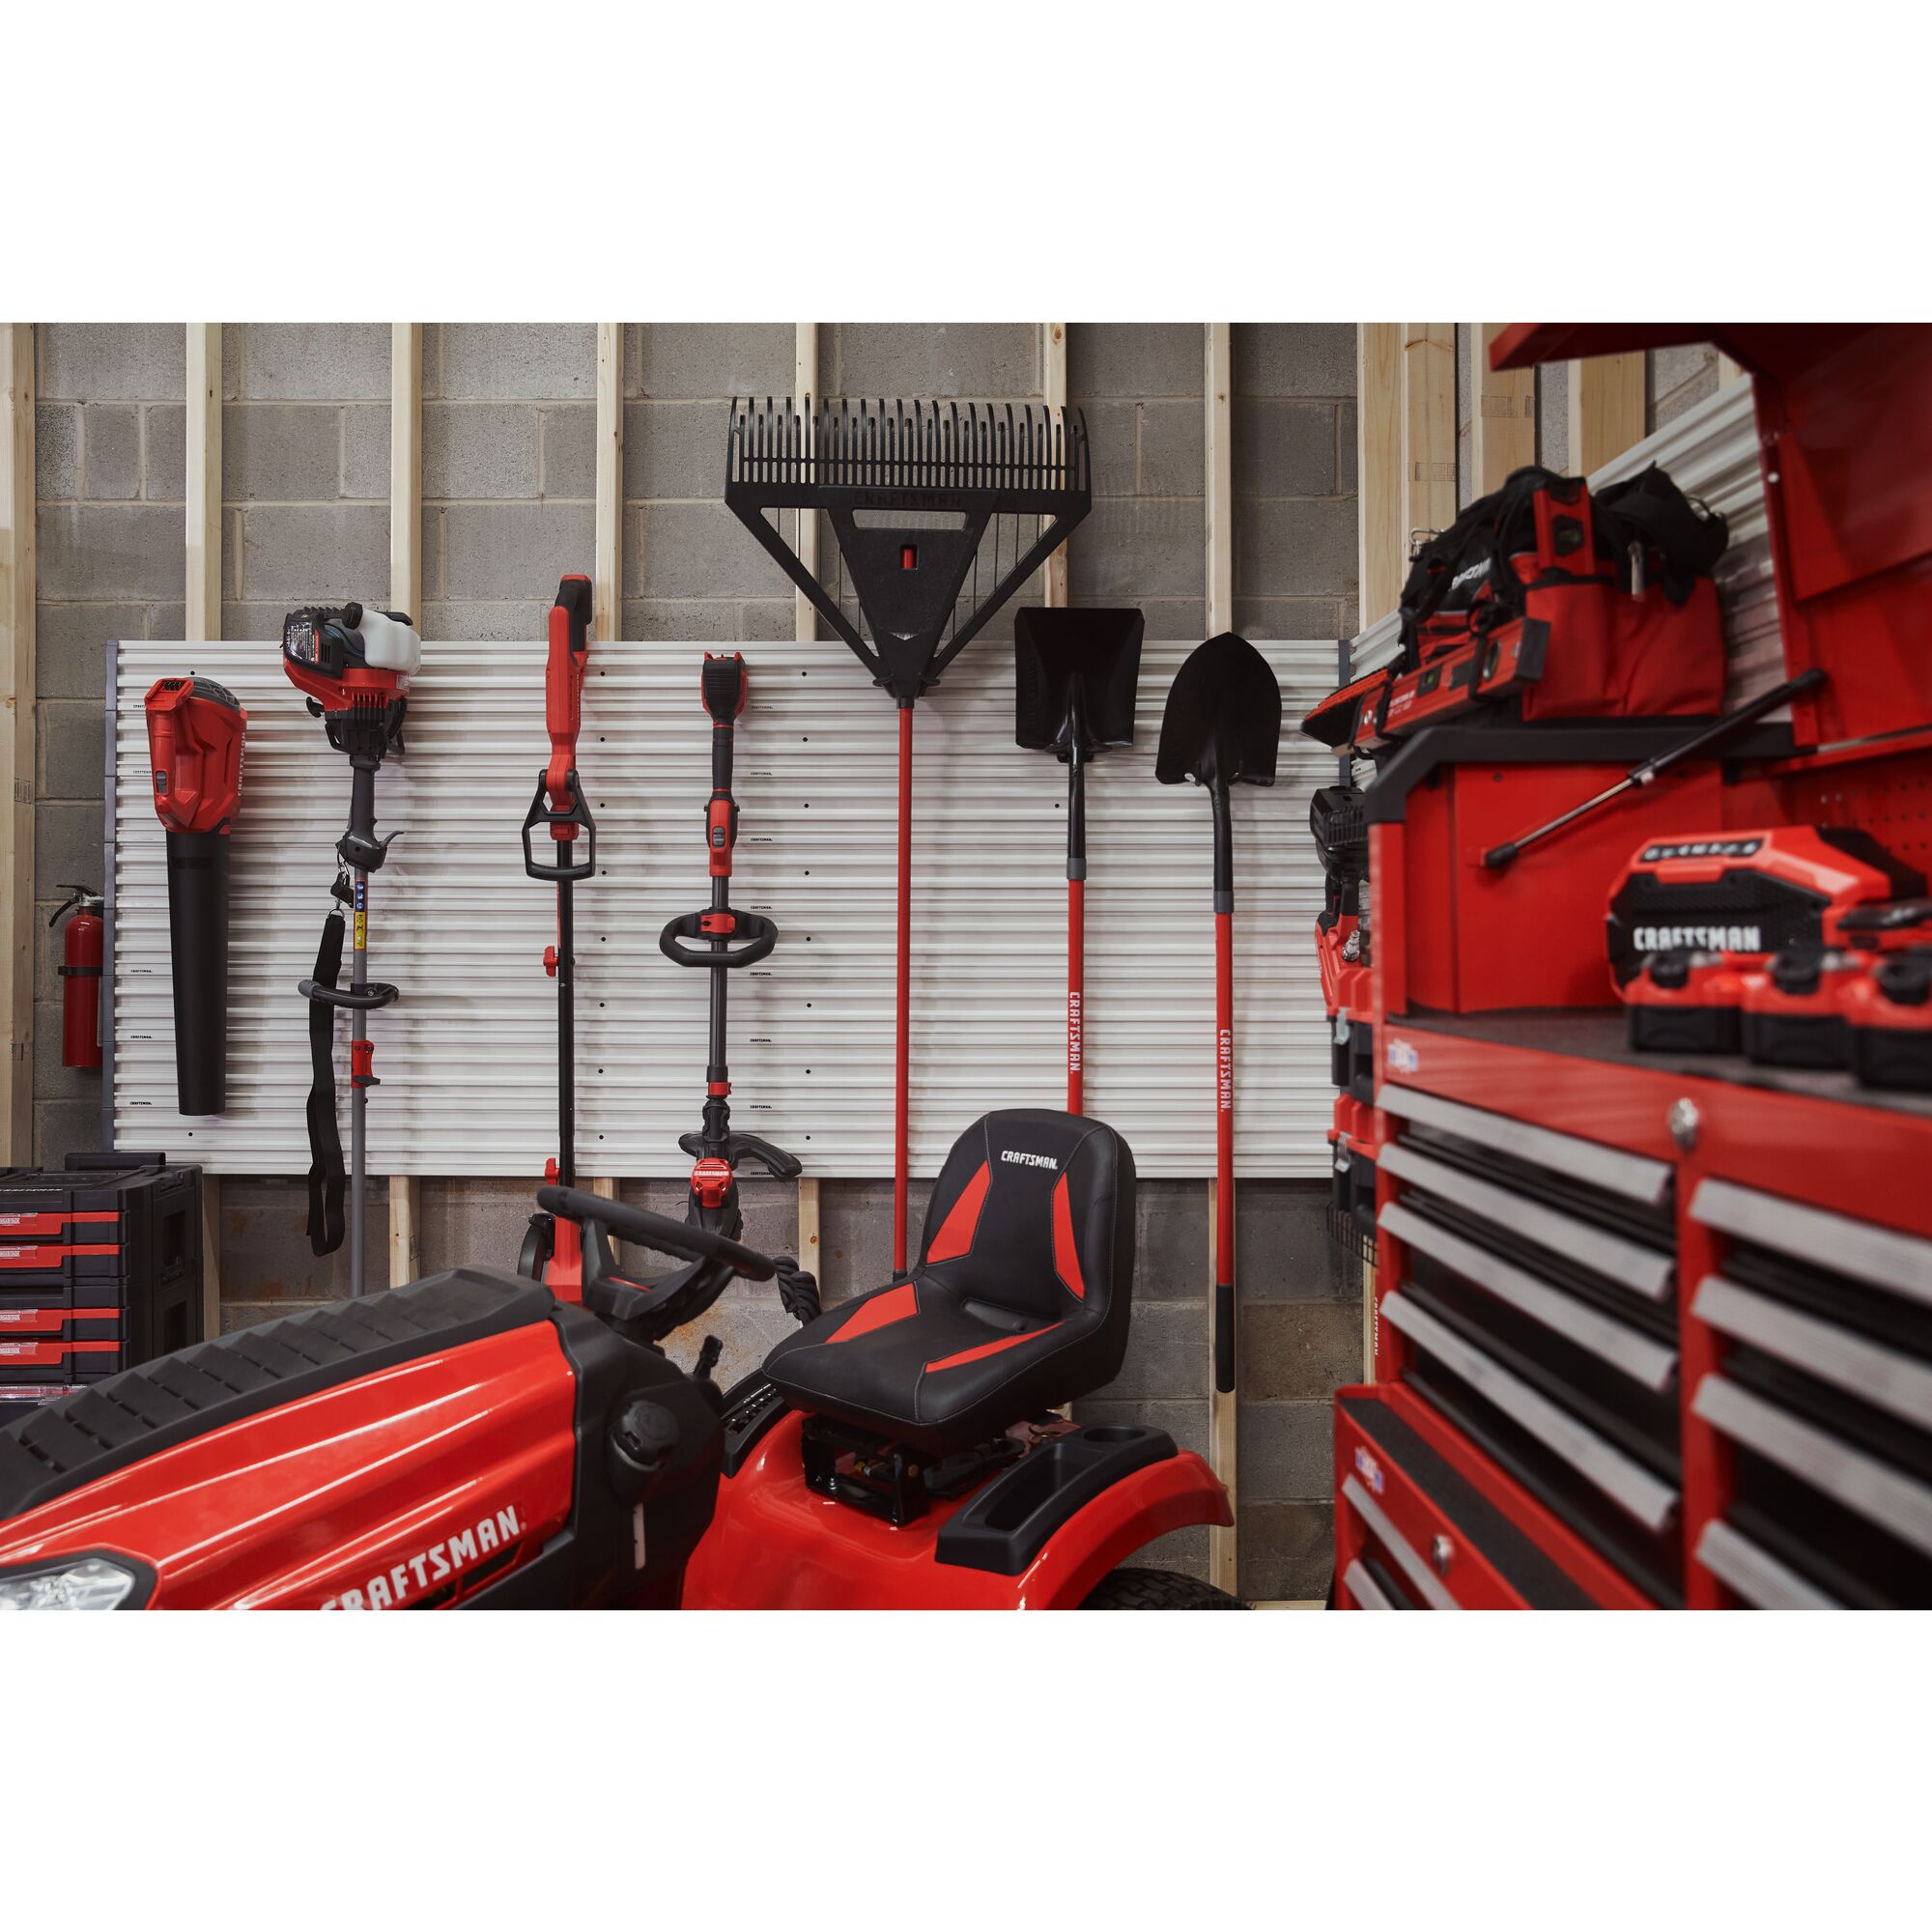 Garage filled with CRAFTSMAN storage, power tools, outdoor products, hand tools, and accessories.